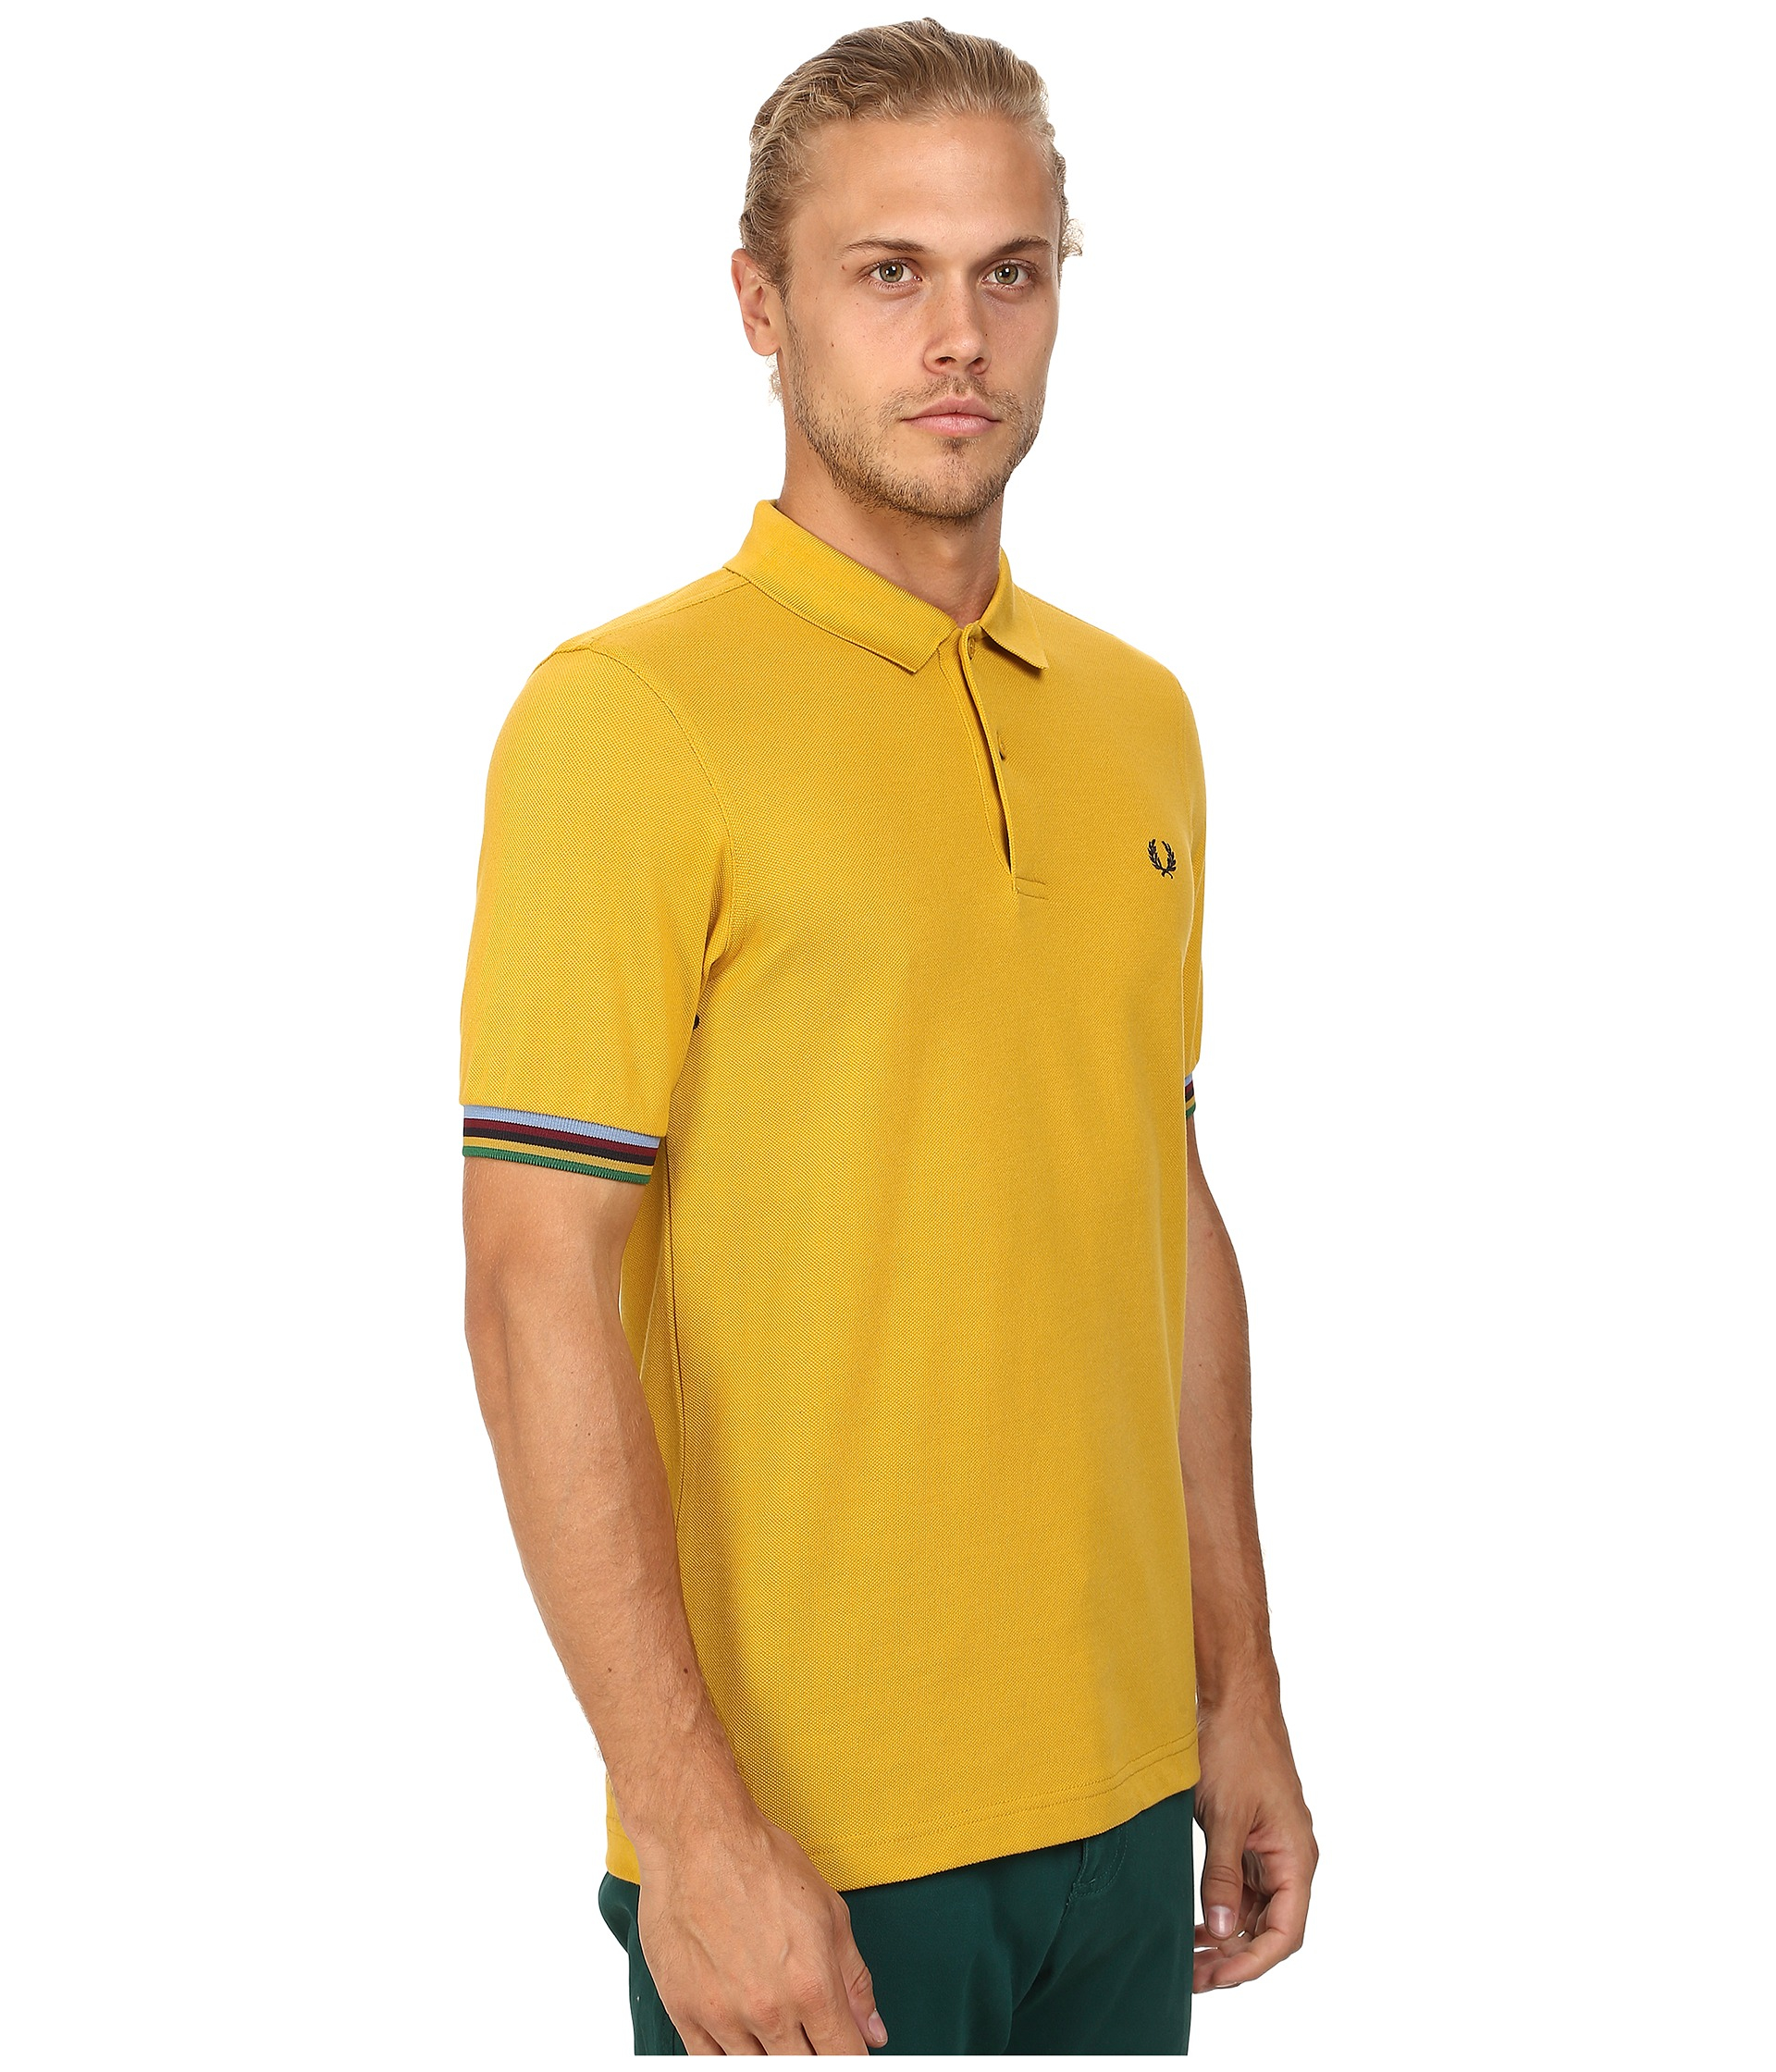 Fred Perry Champion Tipped Shirt in Yellow for Men - Lyst